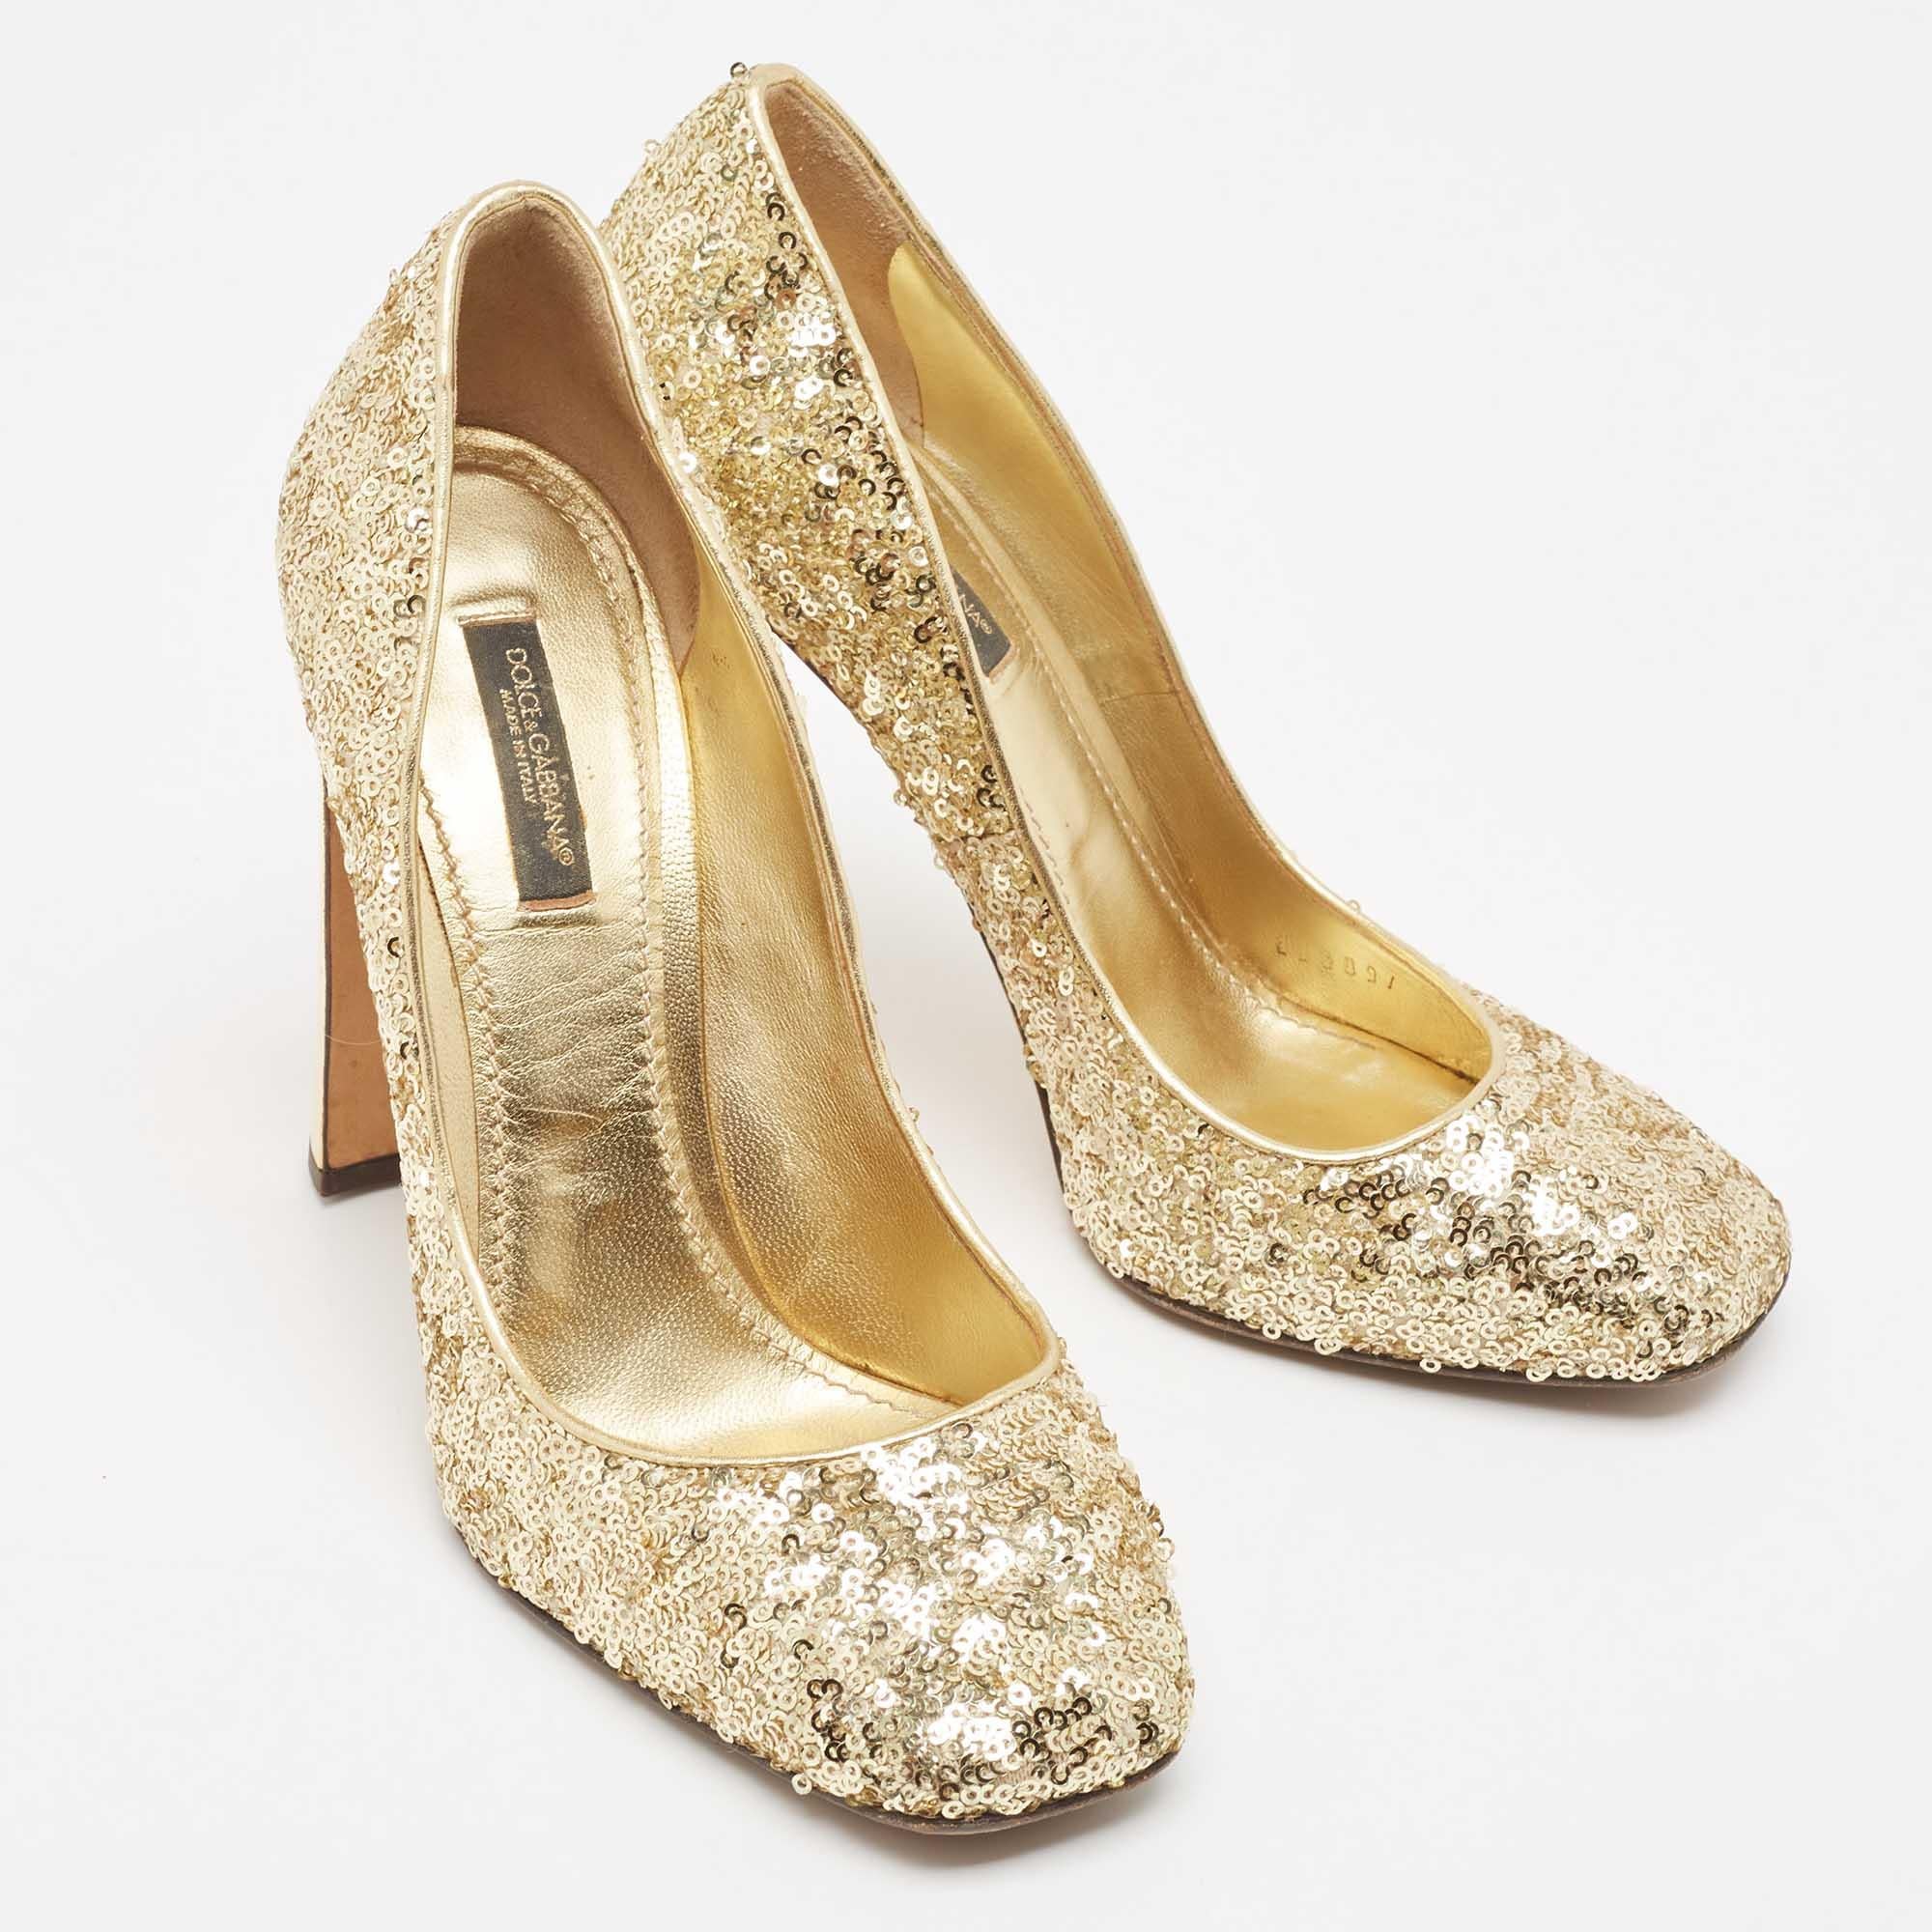 Dolce & Gabbana Gold Sequins Studded Heel Square Toe Pumps Size 38.5 In Good Condition For Sale In Dubai, Al Qouz 2